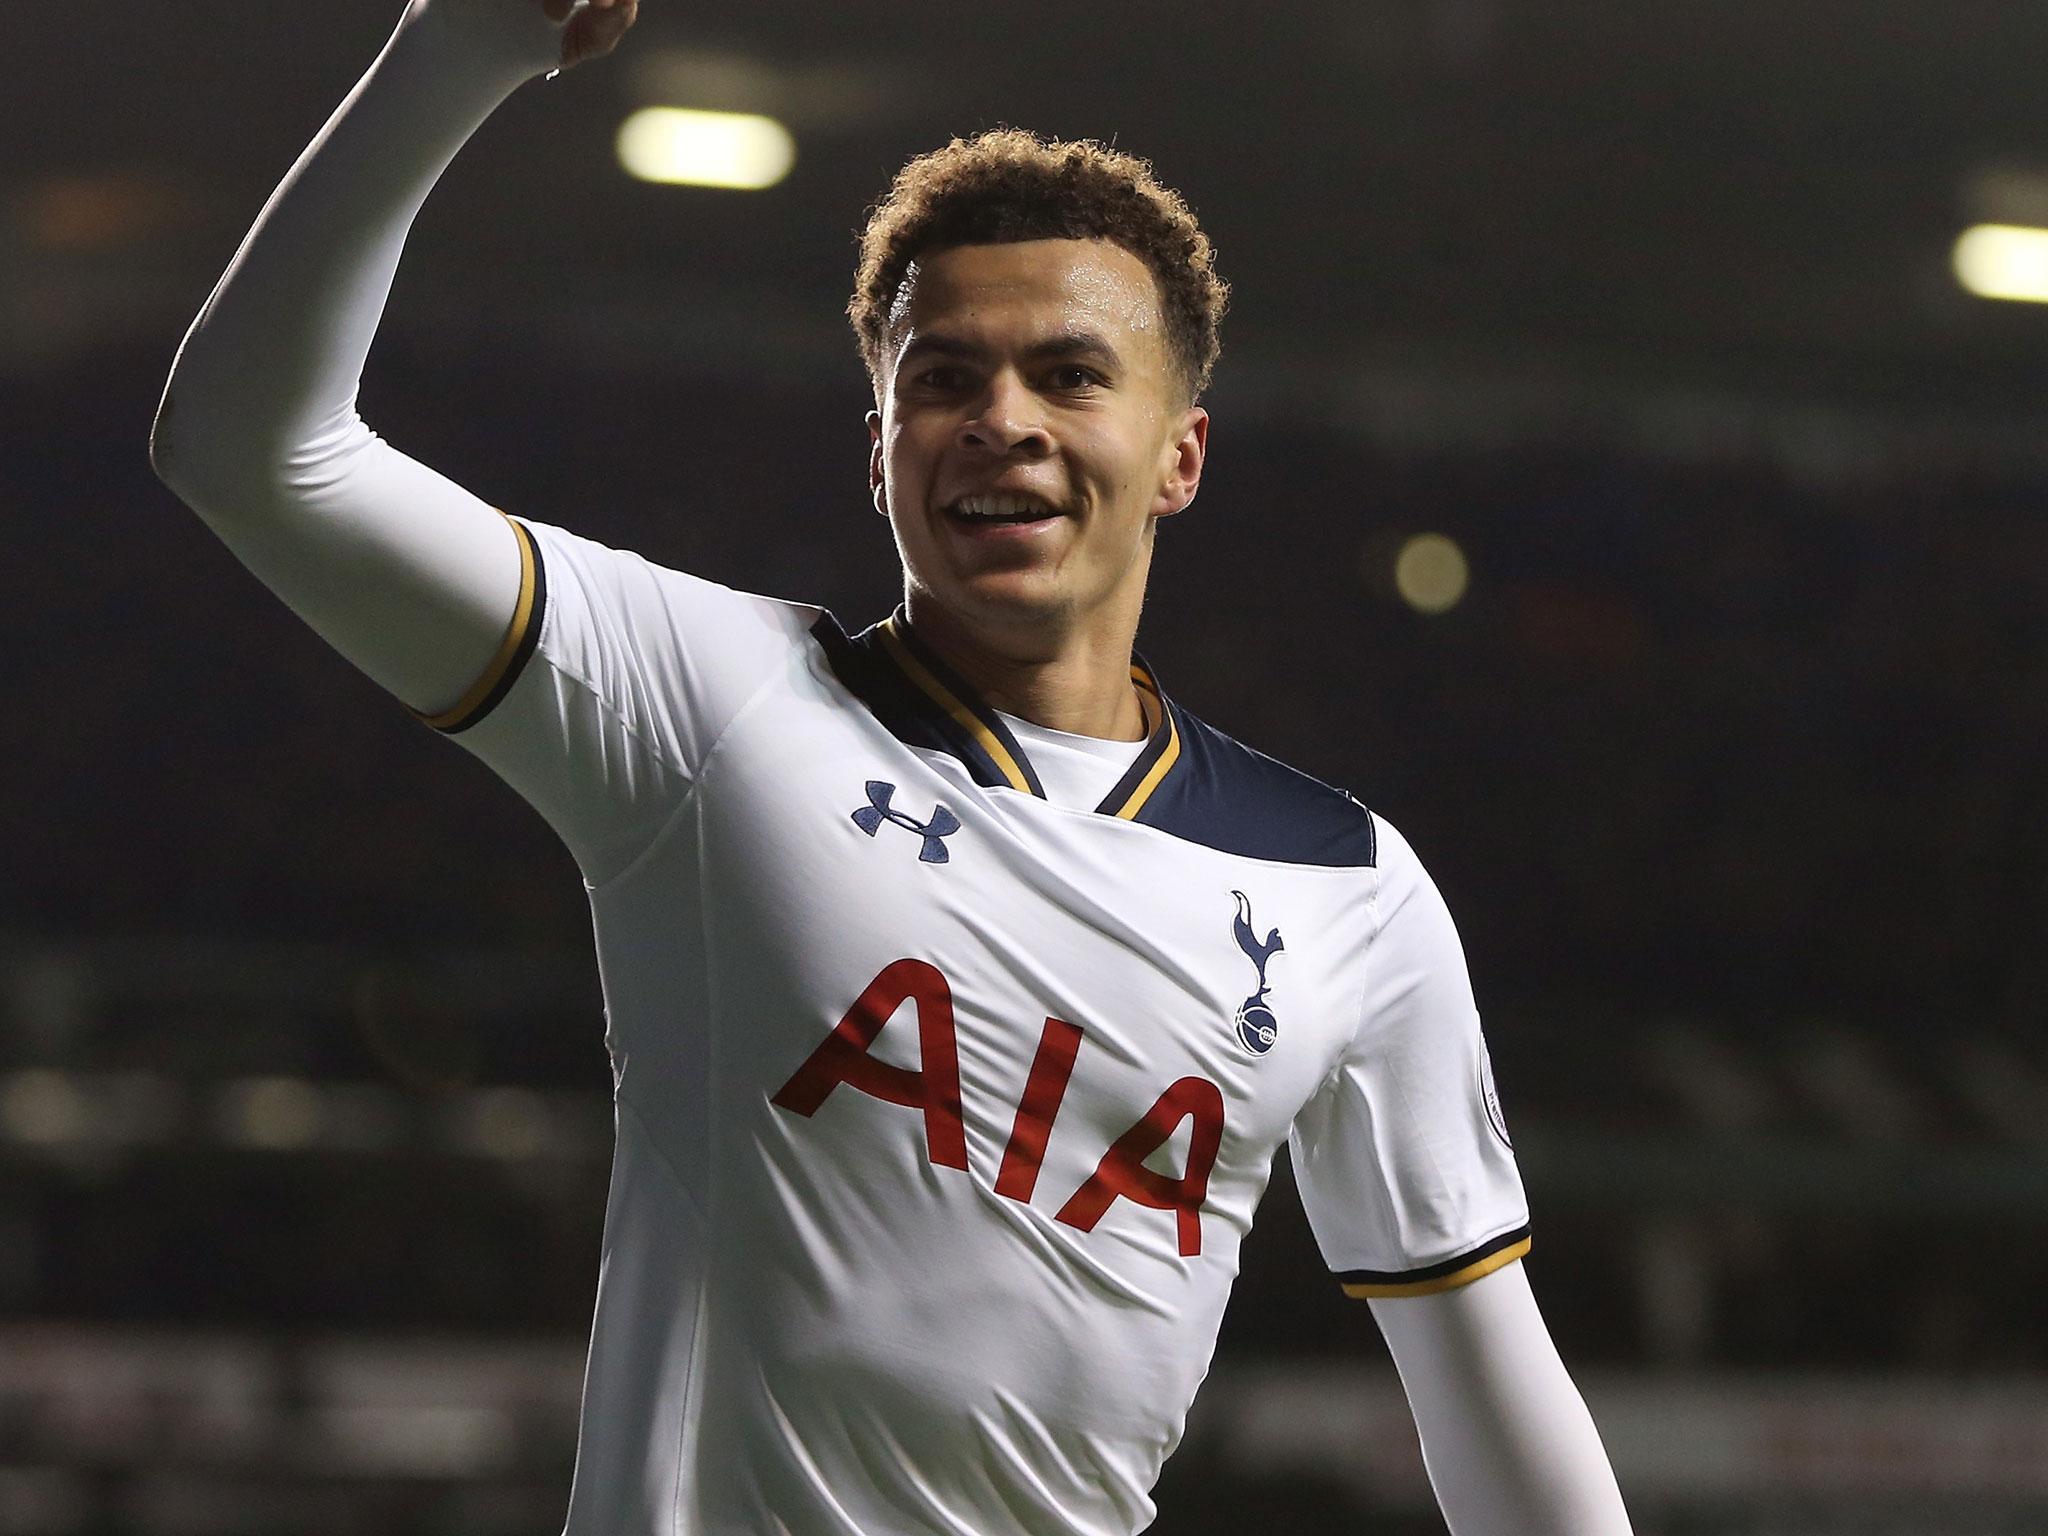 World's most expensive young player: Dele Alli worth more than